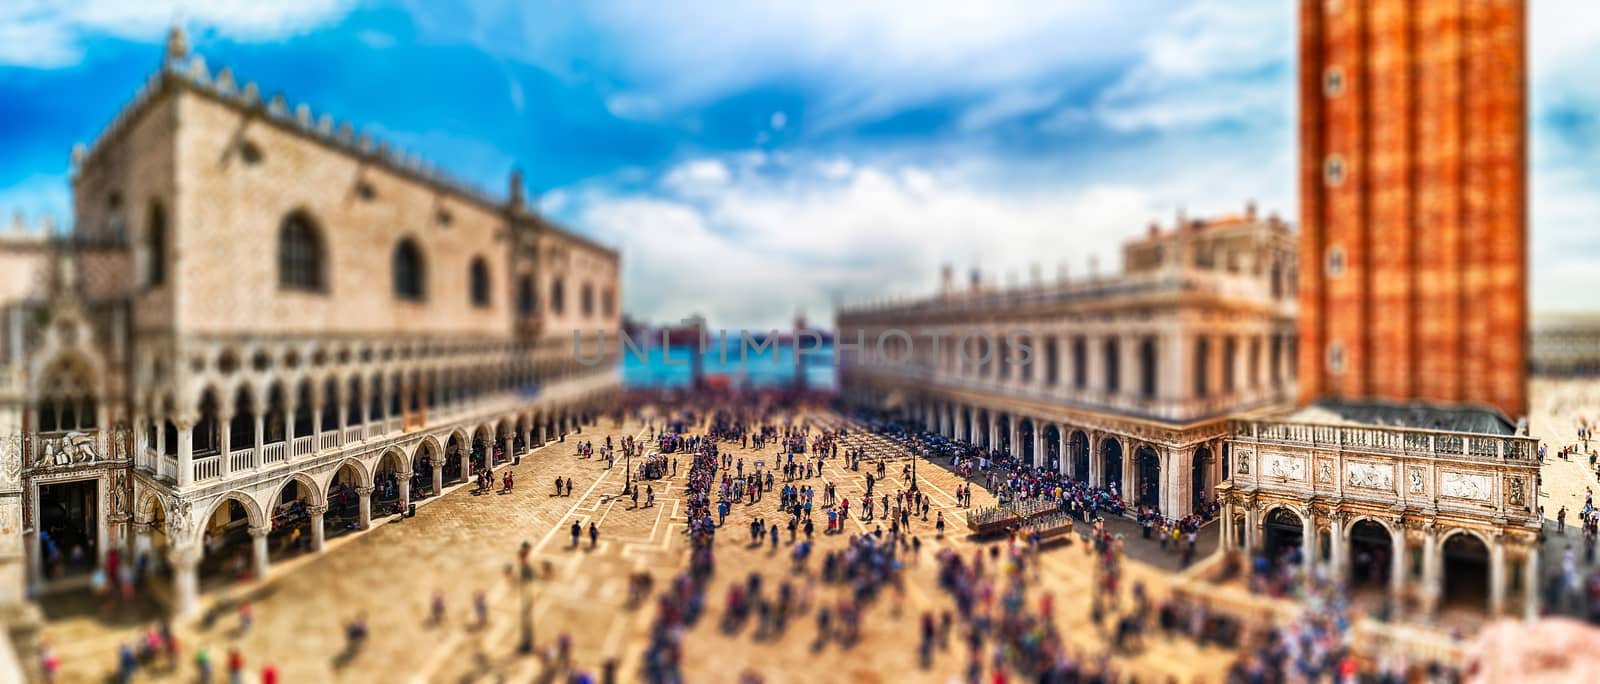 Panoramic aerial view of tourists visiting the iconic Piazza San Marco (St. Mark's Square), Venice, Italy. Tilt-shift effect applied